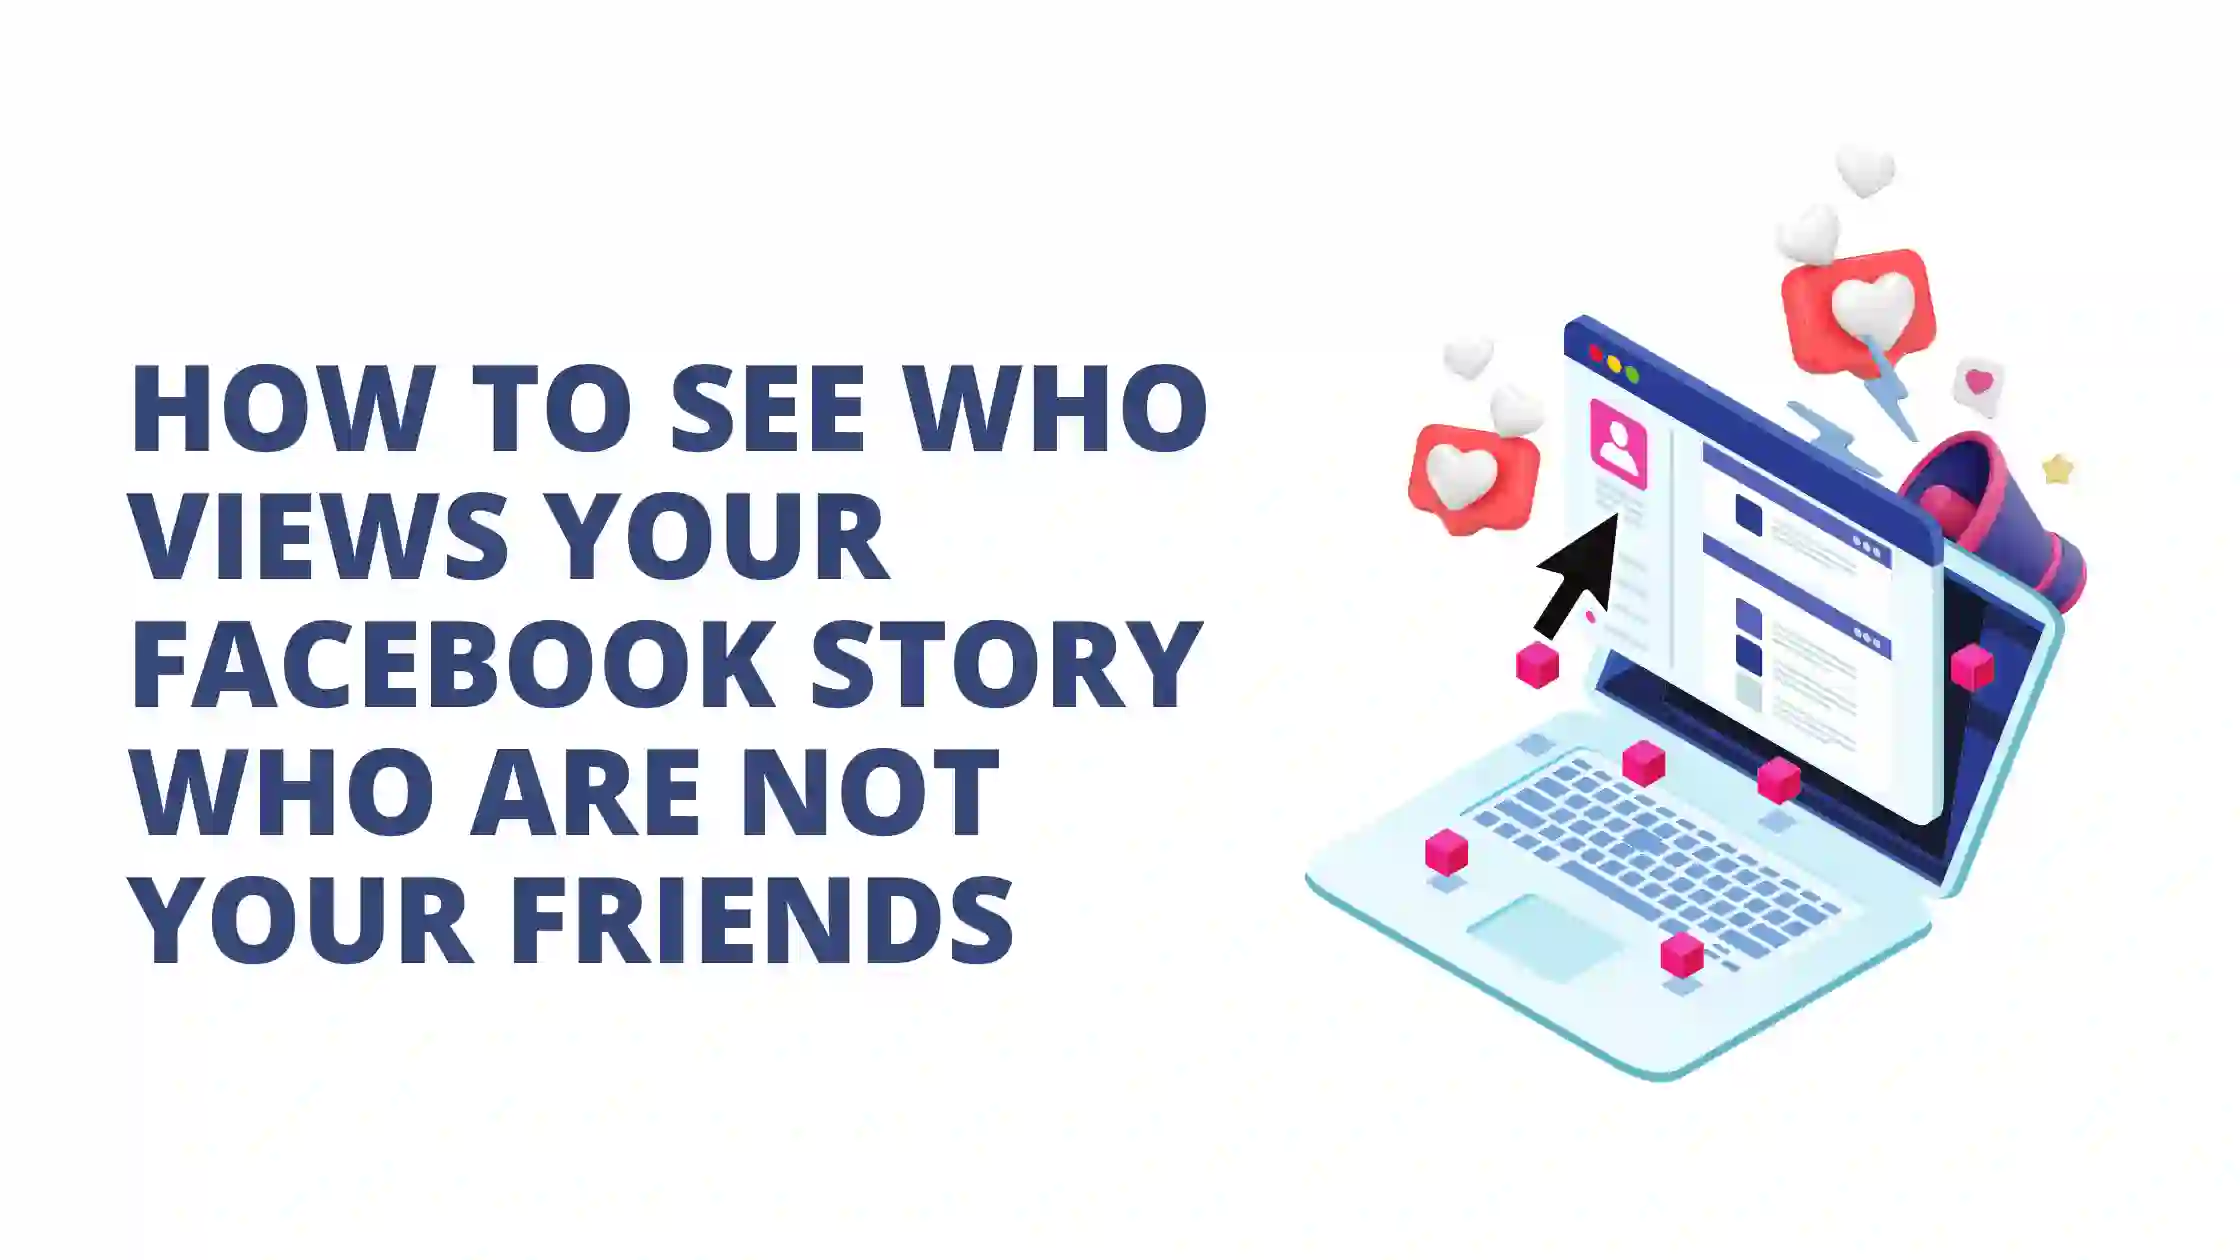 How to See Who Views Your Facebook Story Who Are Not Your Friends